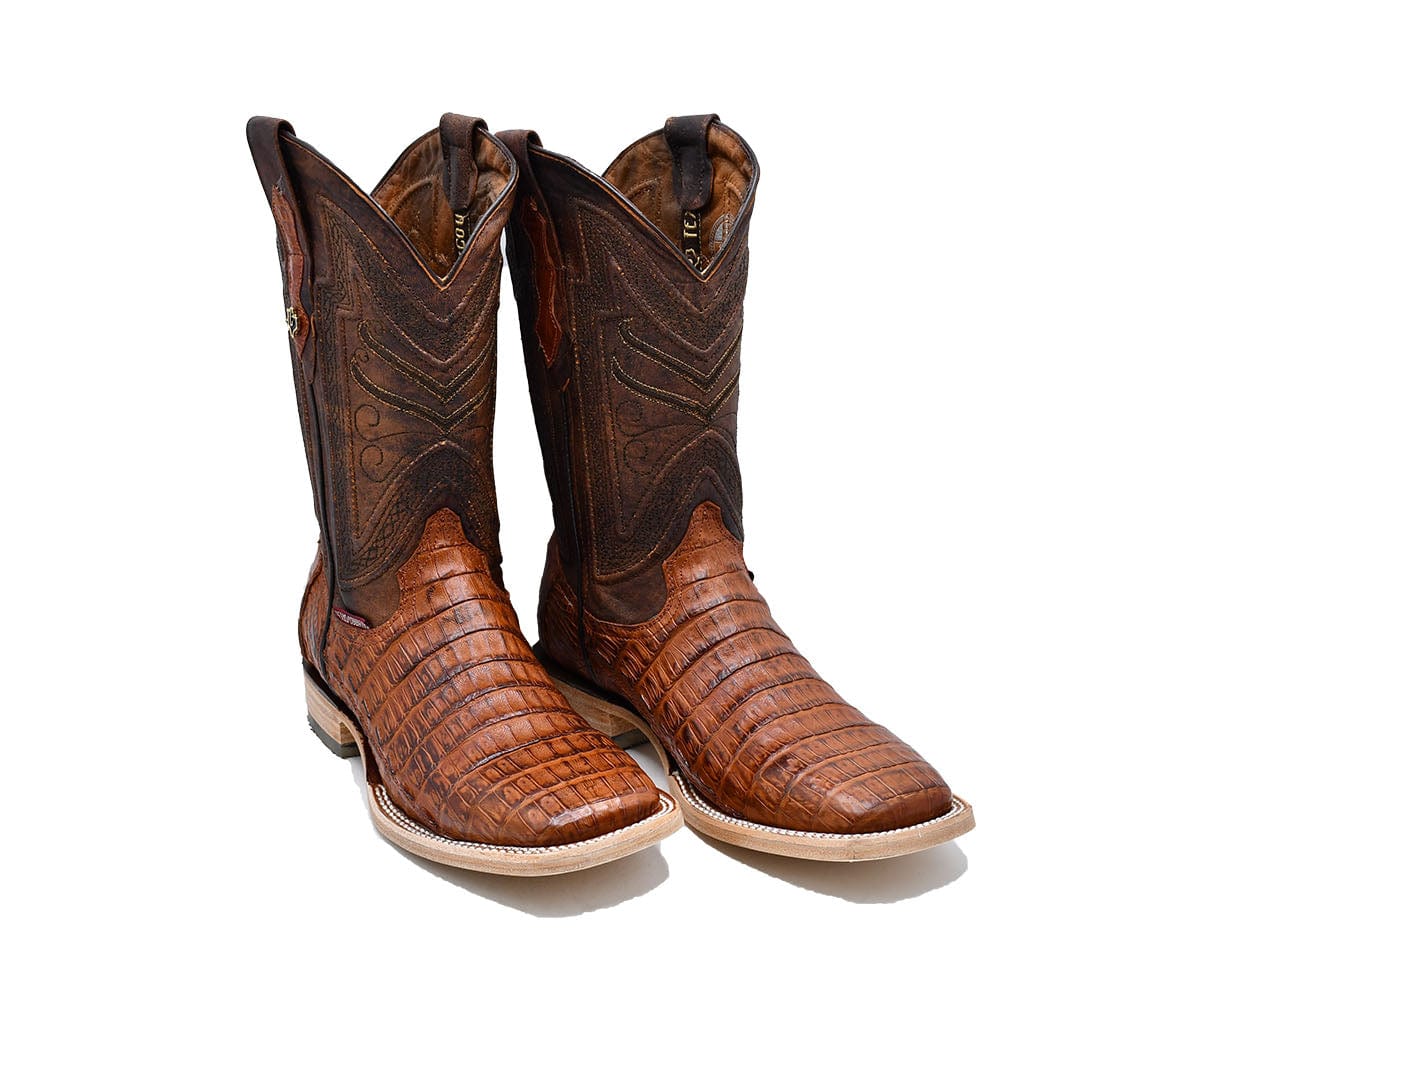 Texas Country Exotic Boot Caiman Belly Cola Brandy LM10